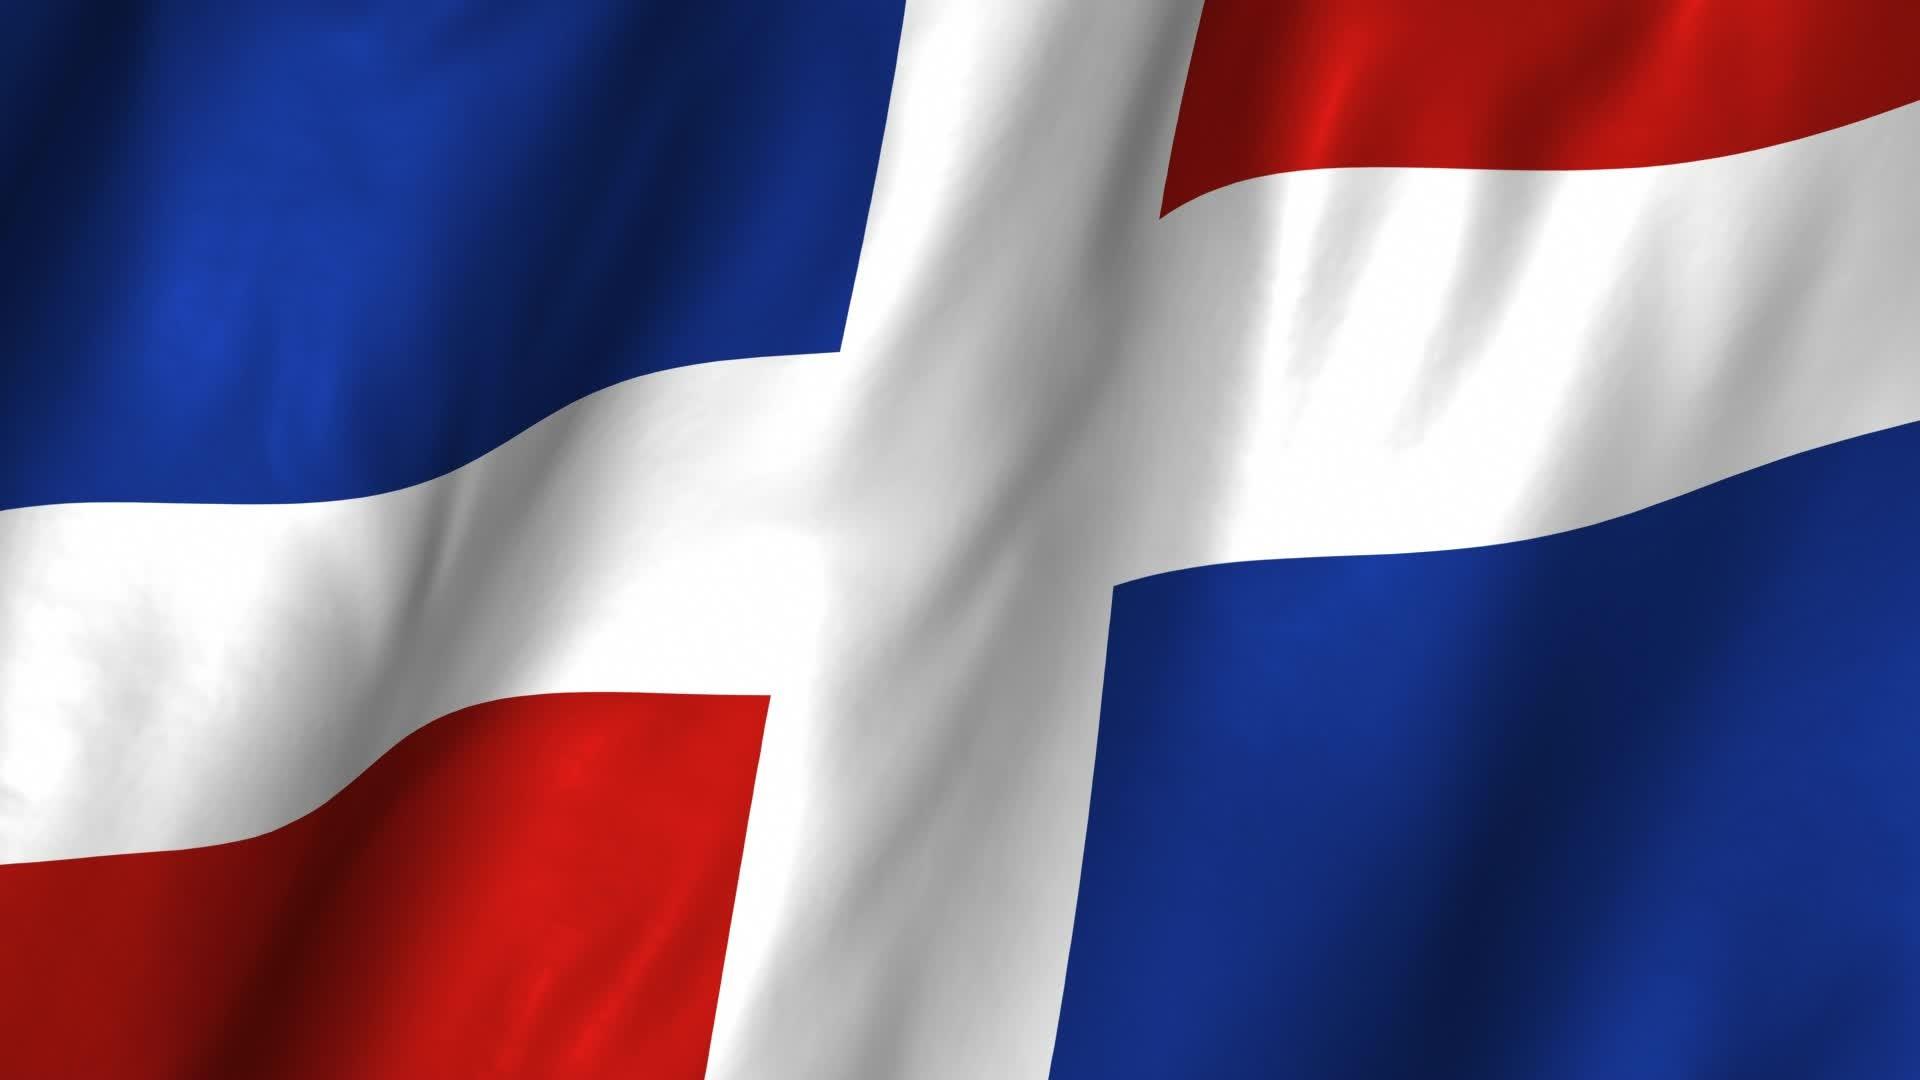 Dominican Flag Wallpaper 69 images